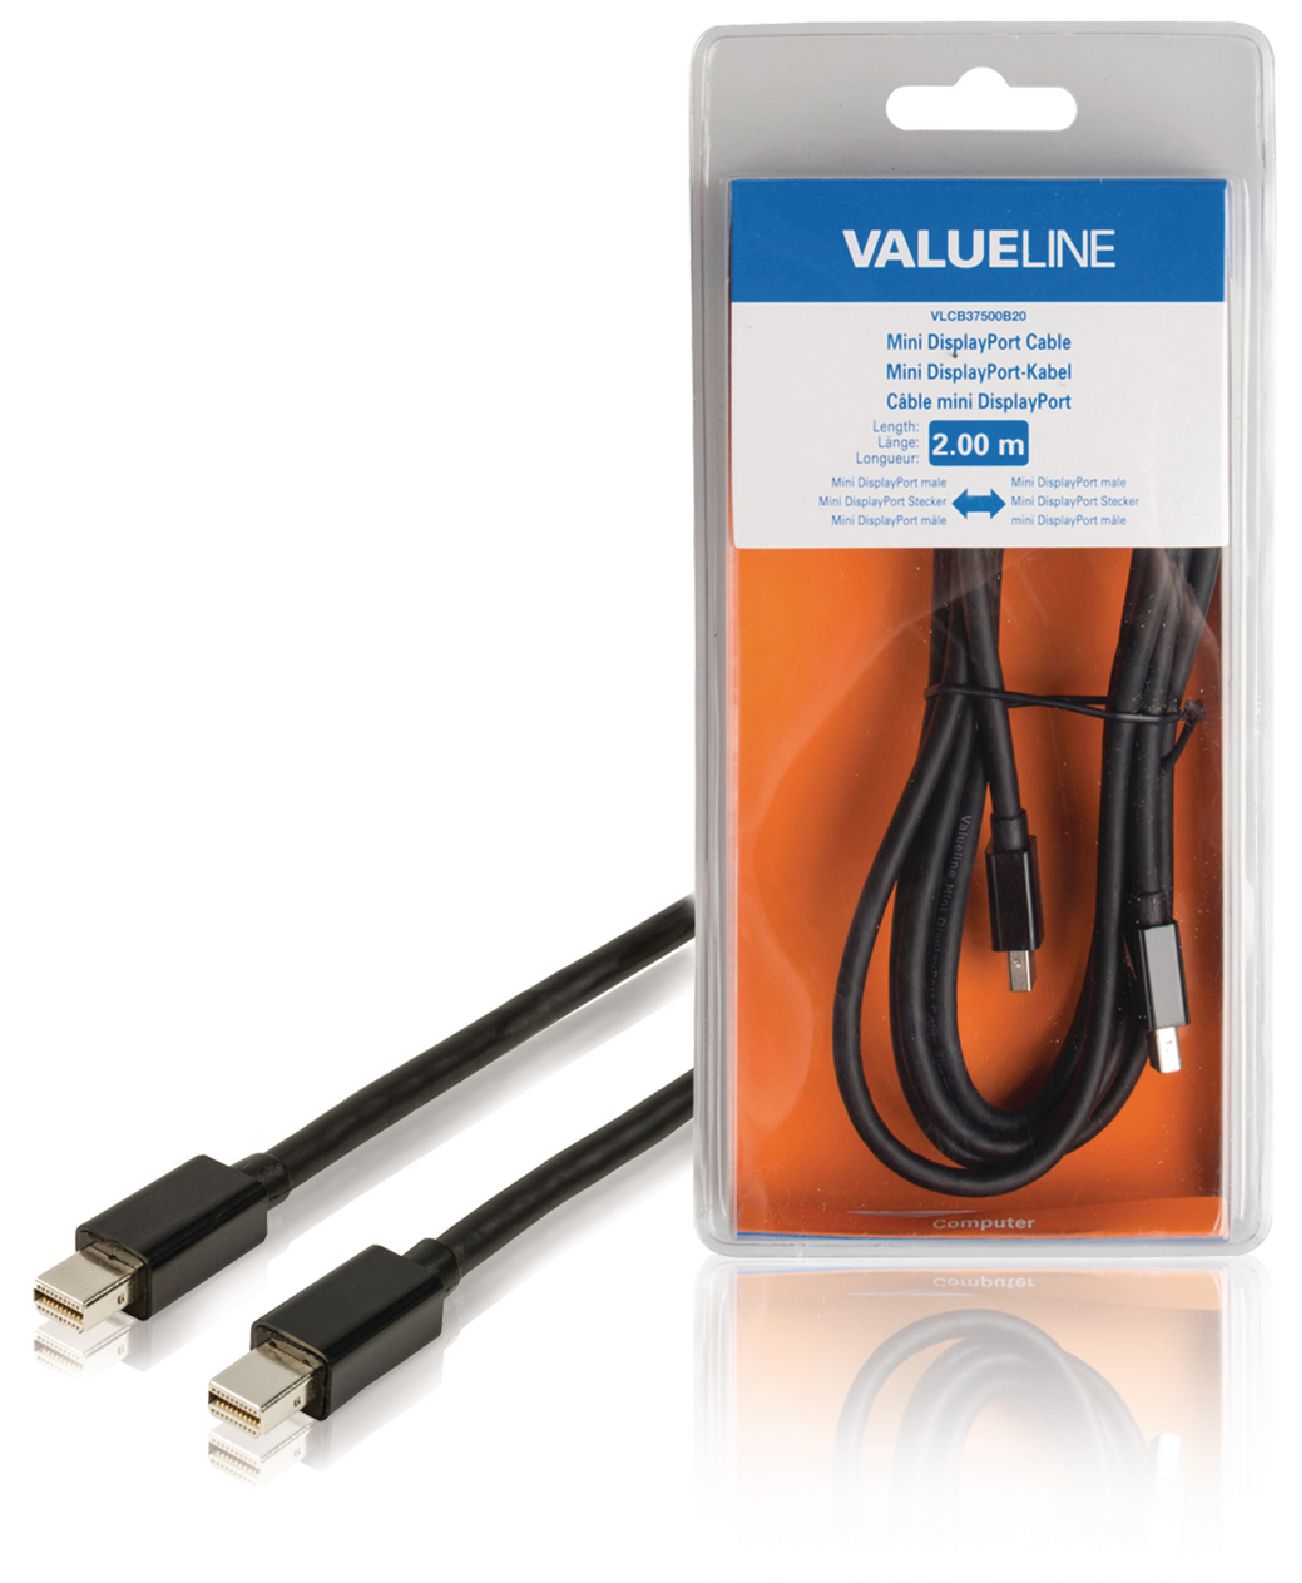 HDMI cable A male to micro HDMI (D) male, black, length 2.00m, polybag